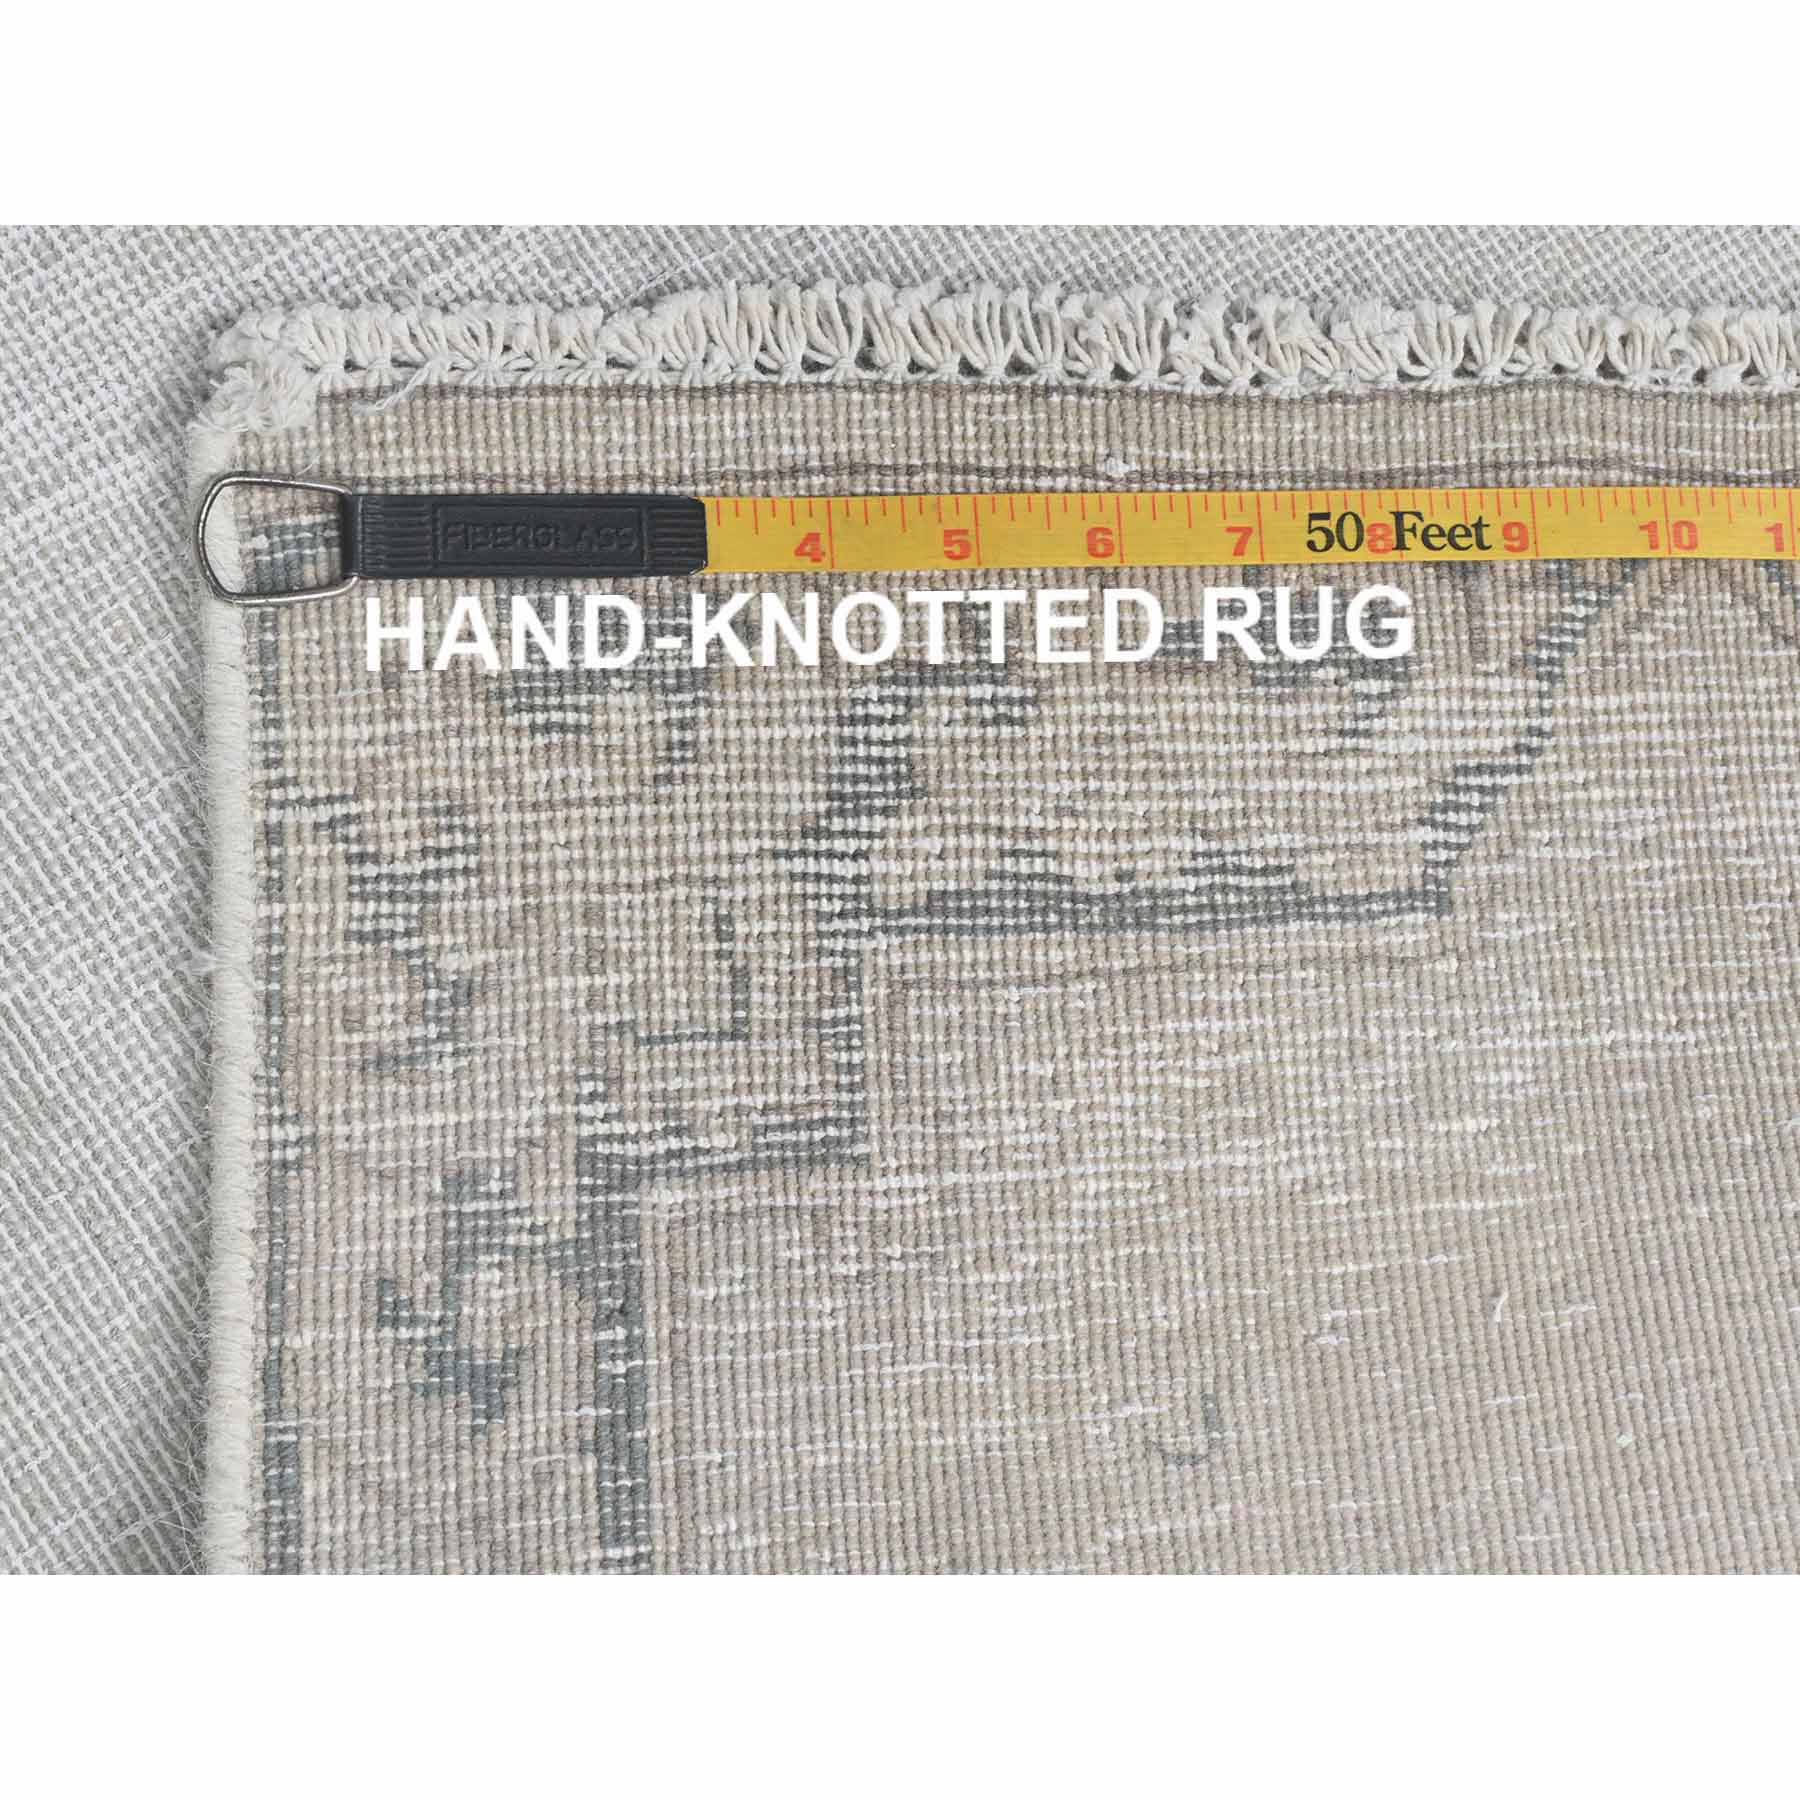 Overdyed-Vintage-Hand-Knotted-Rug-409885